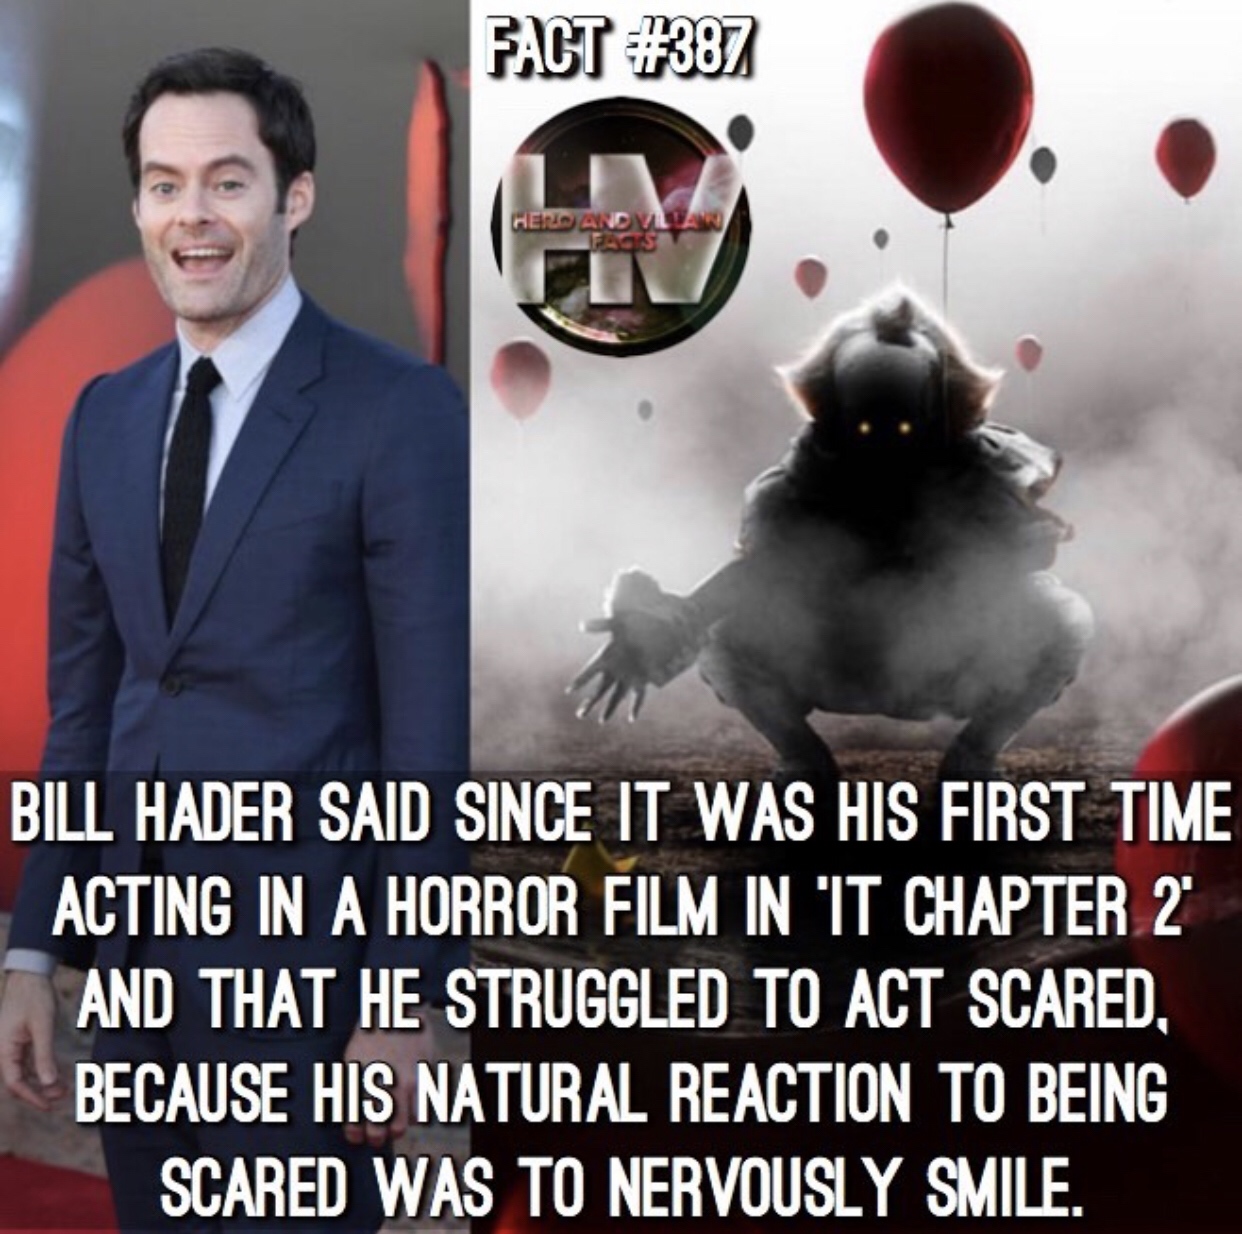 bill hader it chapter 2 memes - Fact Herid Anda Fs Bill Hader Said Since It Was His First Time Acting In A Horror Film In 'It Chapter 2 And That He Struggled To Act Scared, Because His Natural Reaction To Being Scared Was To Nervously Smile.